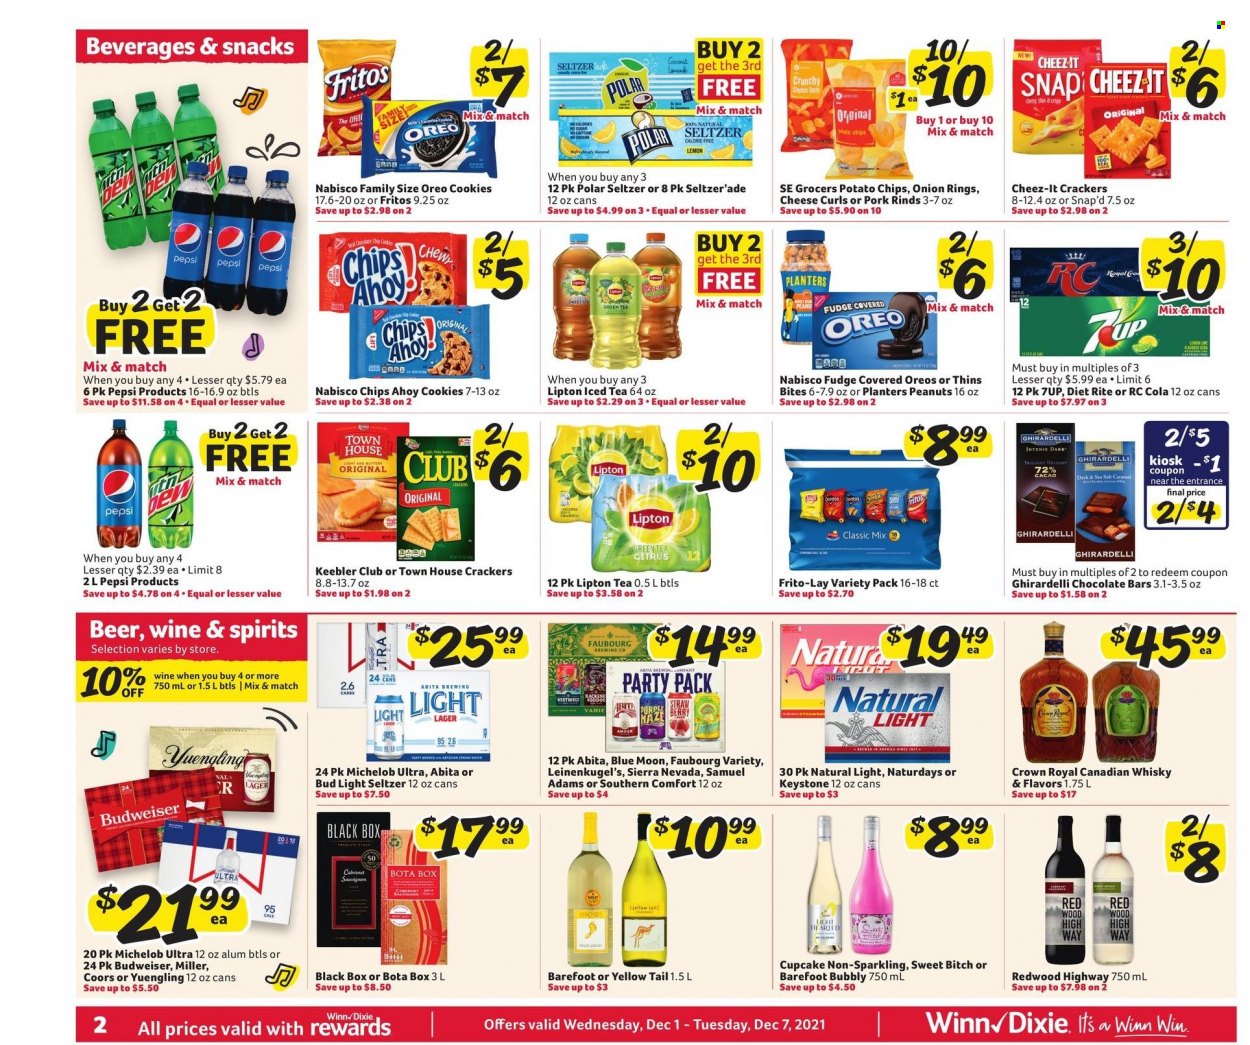 thumbnail - Winn Dixie Flyer - 12/01/2021 - 12/07/2021 - Sales products - cupcake, onion rings, cheese, Oreo, cookies, fudge, snack, crackers, Ghirardelli, Keebler, chocolate bar, Fritos, potato chips, chips, Thins, Frito-Lay, Cheez-It, peanuts, Planters, Pepsi, Lipton, ice tea, 7UP, green tea, Cabernet Sauvignon, red wine, wine, canadian whisky, Hard Seltzer, whisky, beer, Bud Light, Miller, Lager, Keystone, straw, Budweiser, Leinenkugel's, Coors, Blue Moon, Yuengling, Michelob. Page 2.